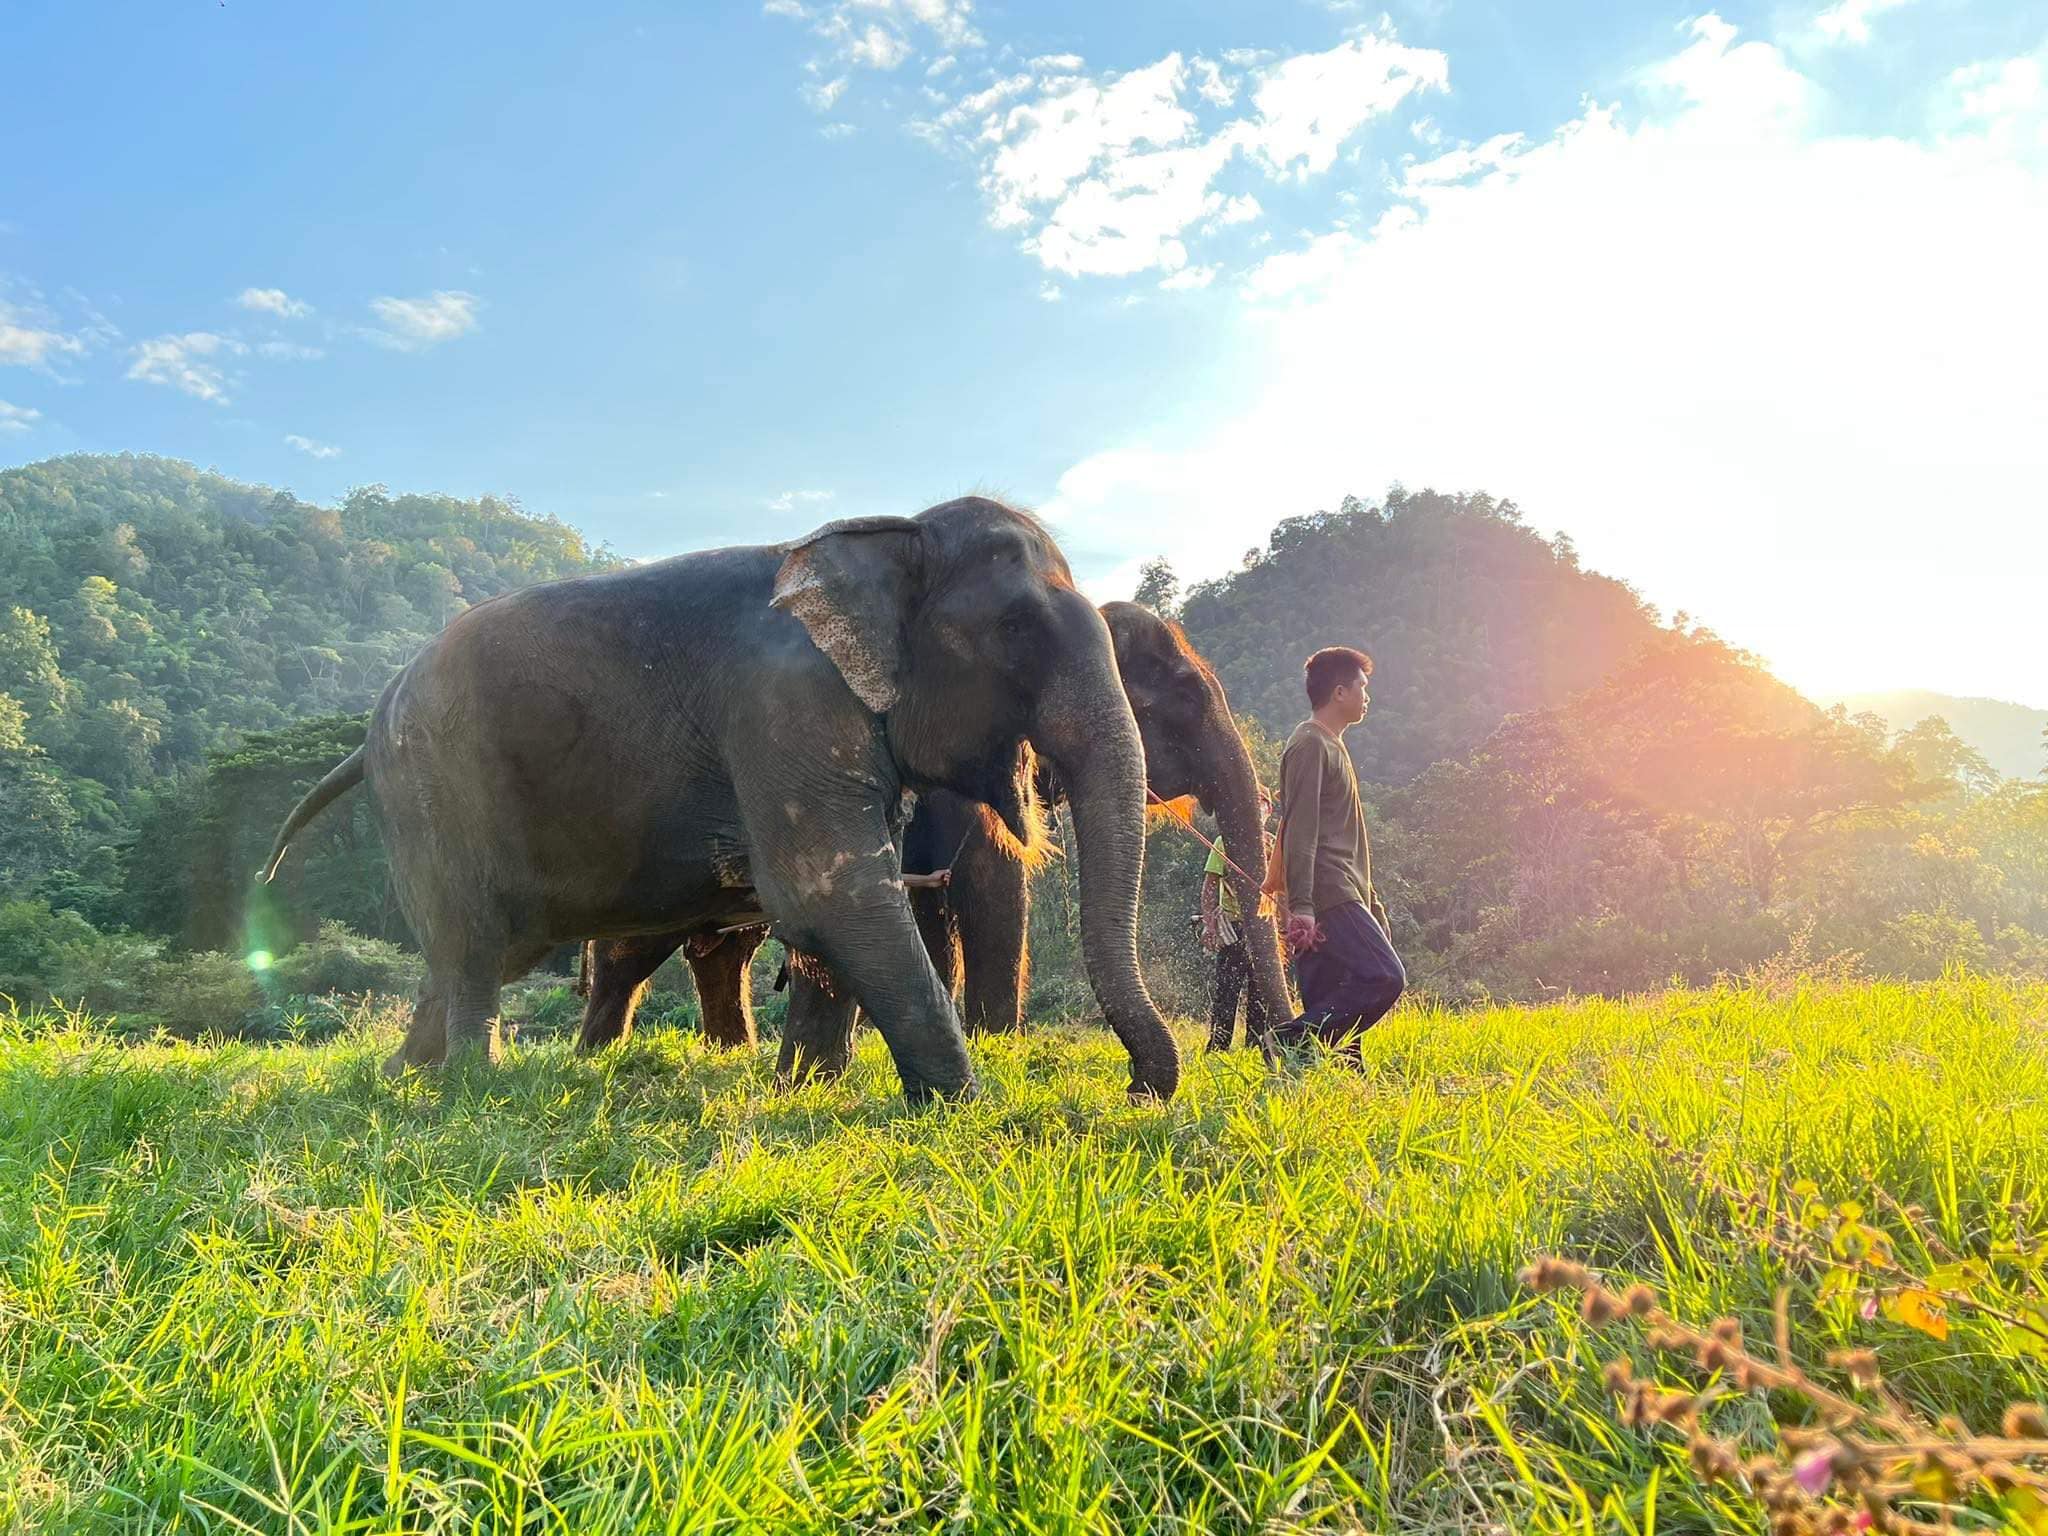 Welcome the three new rescued elephants to live with freedom at Elephant Nature Park.